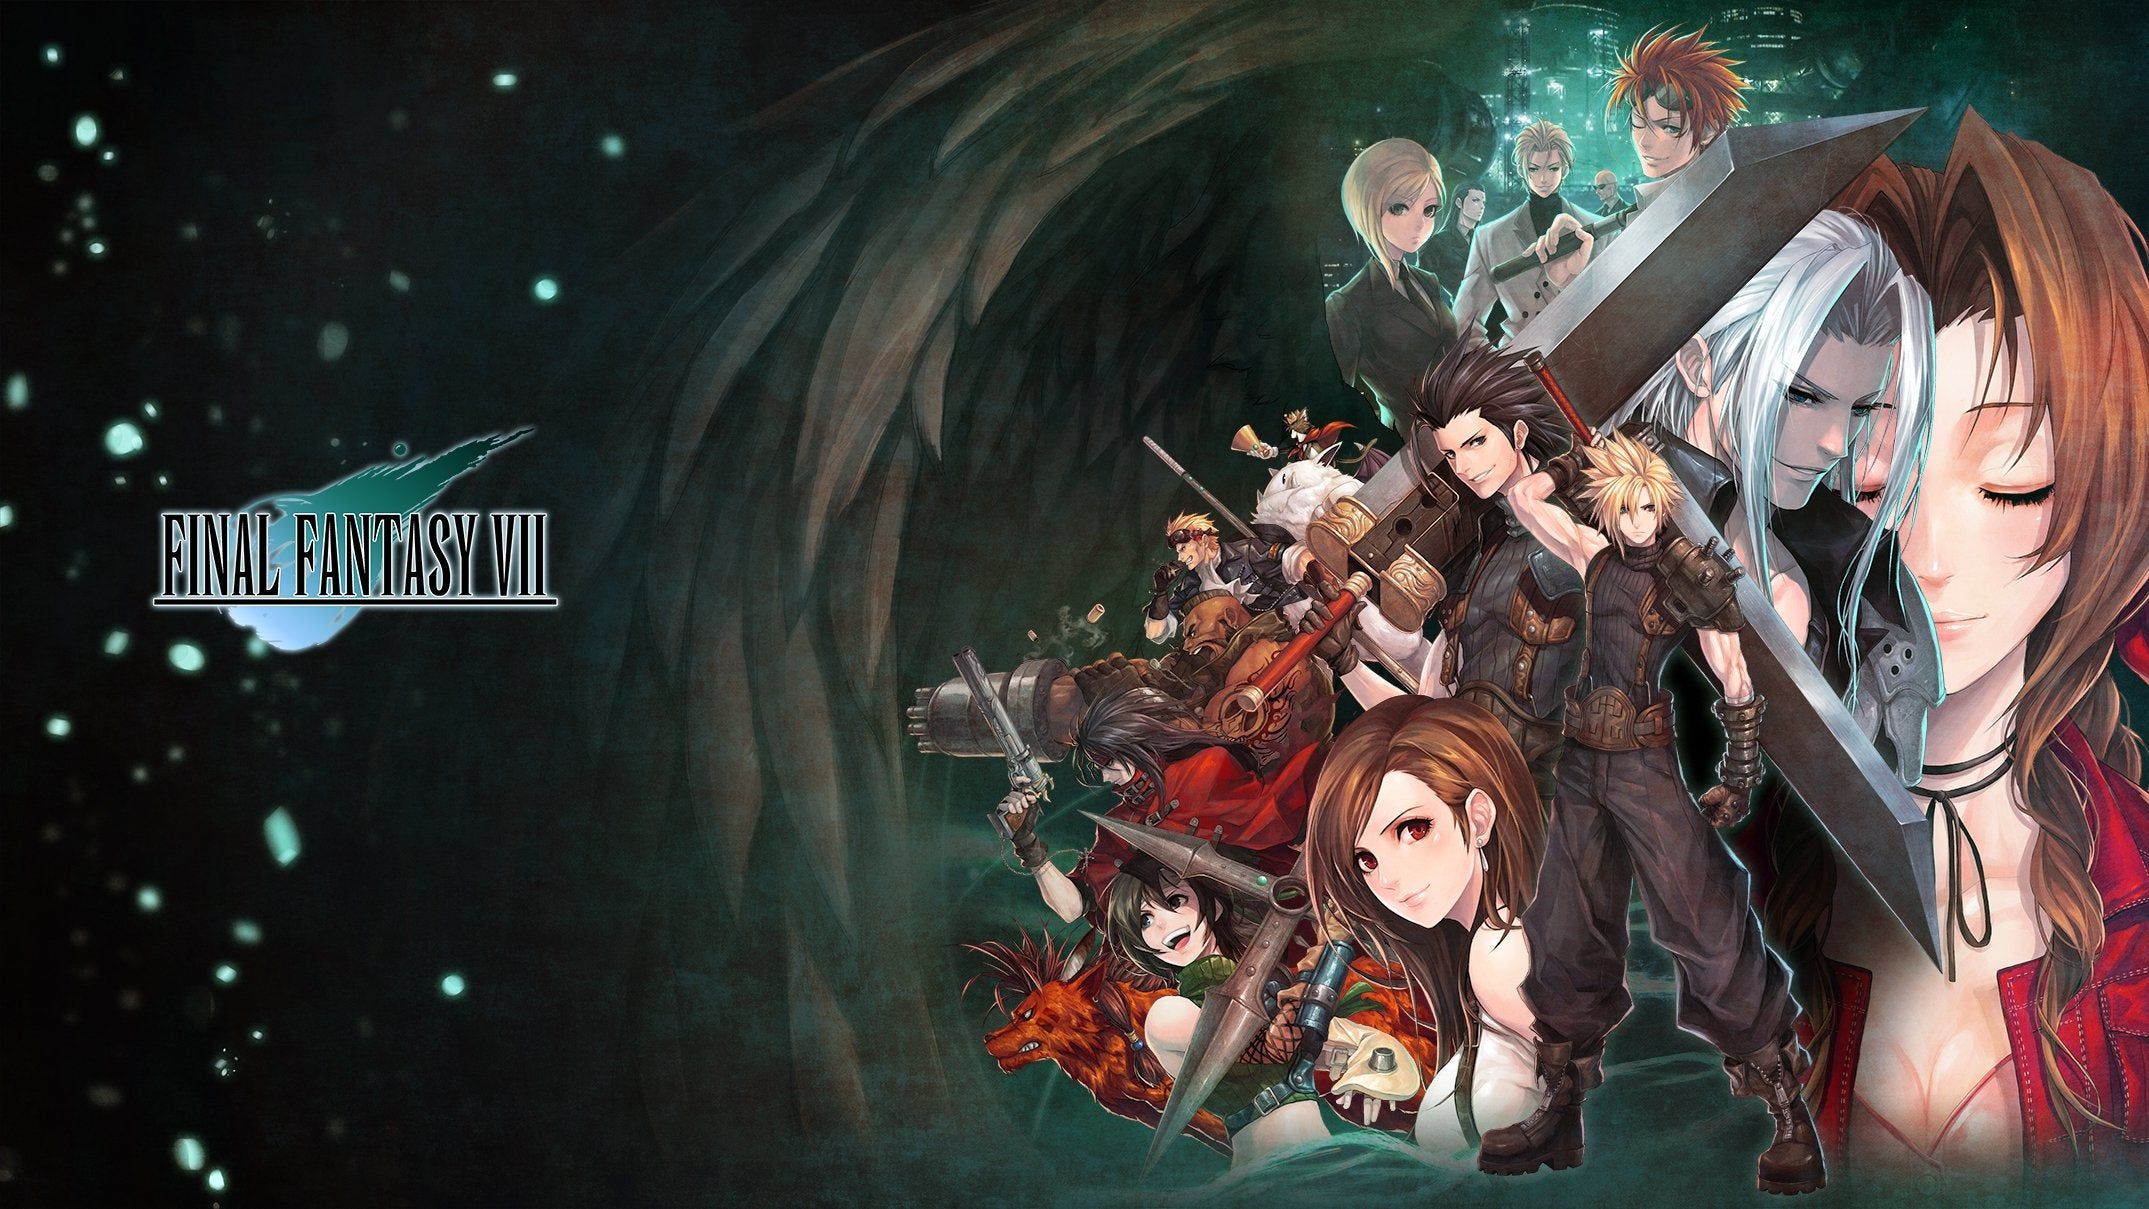 An amazing Final Fantasy 7 wallpaper in honor of the remake